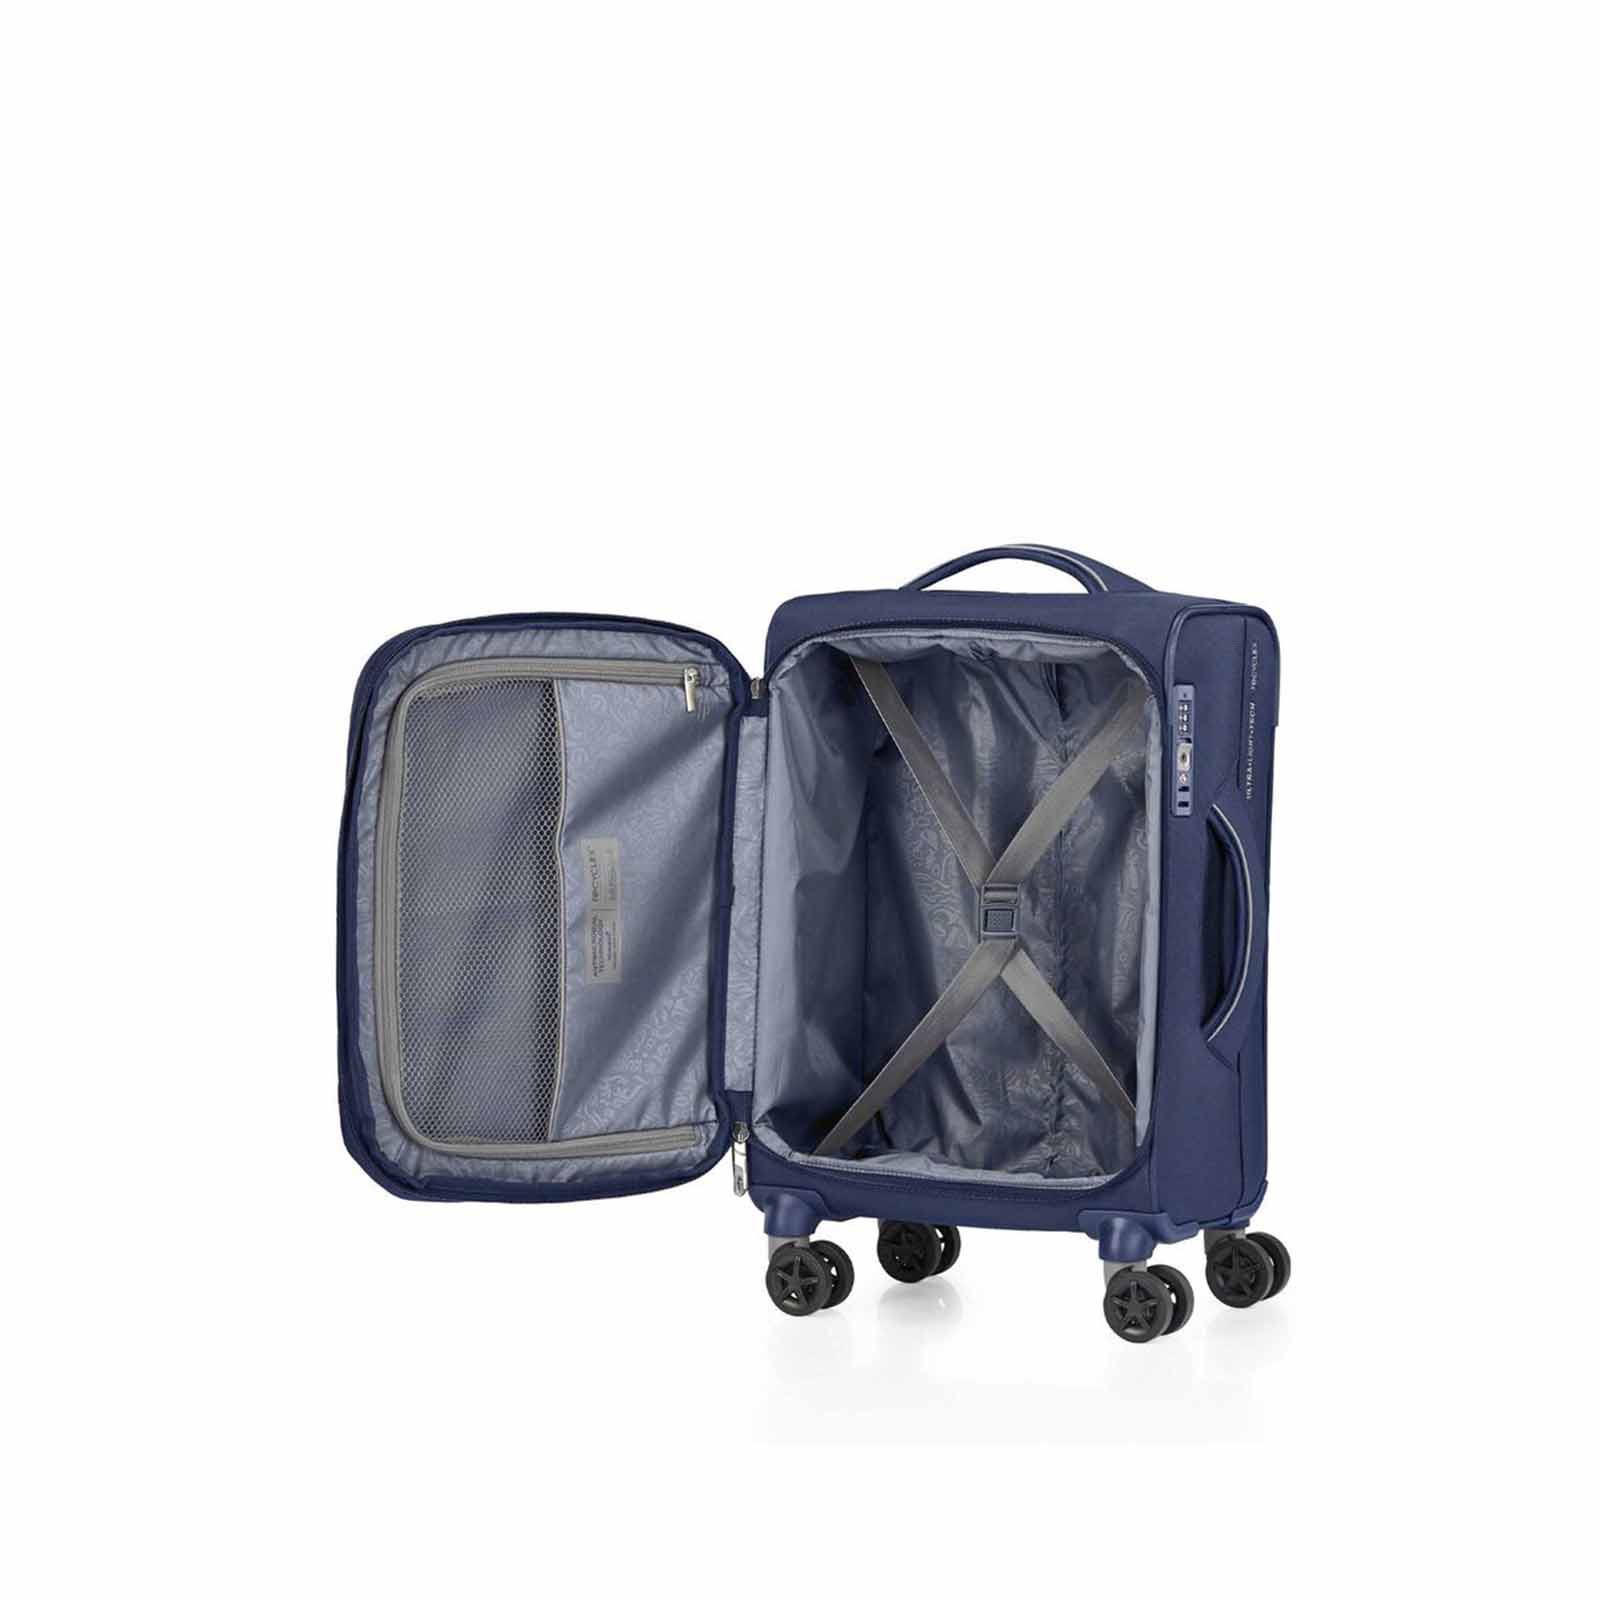 American-Tourister-Applite-4-Eco-55cm-Carry-On-Suitcase-Navy-Open